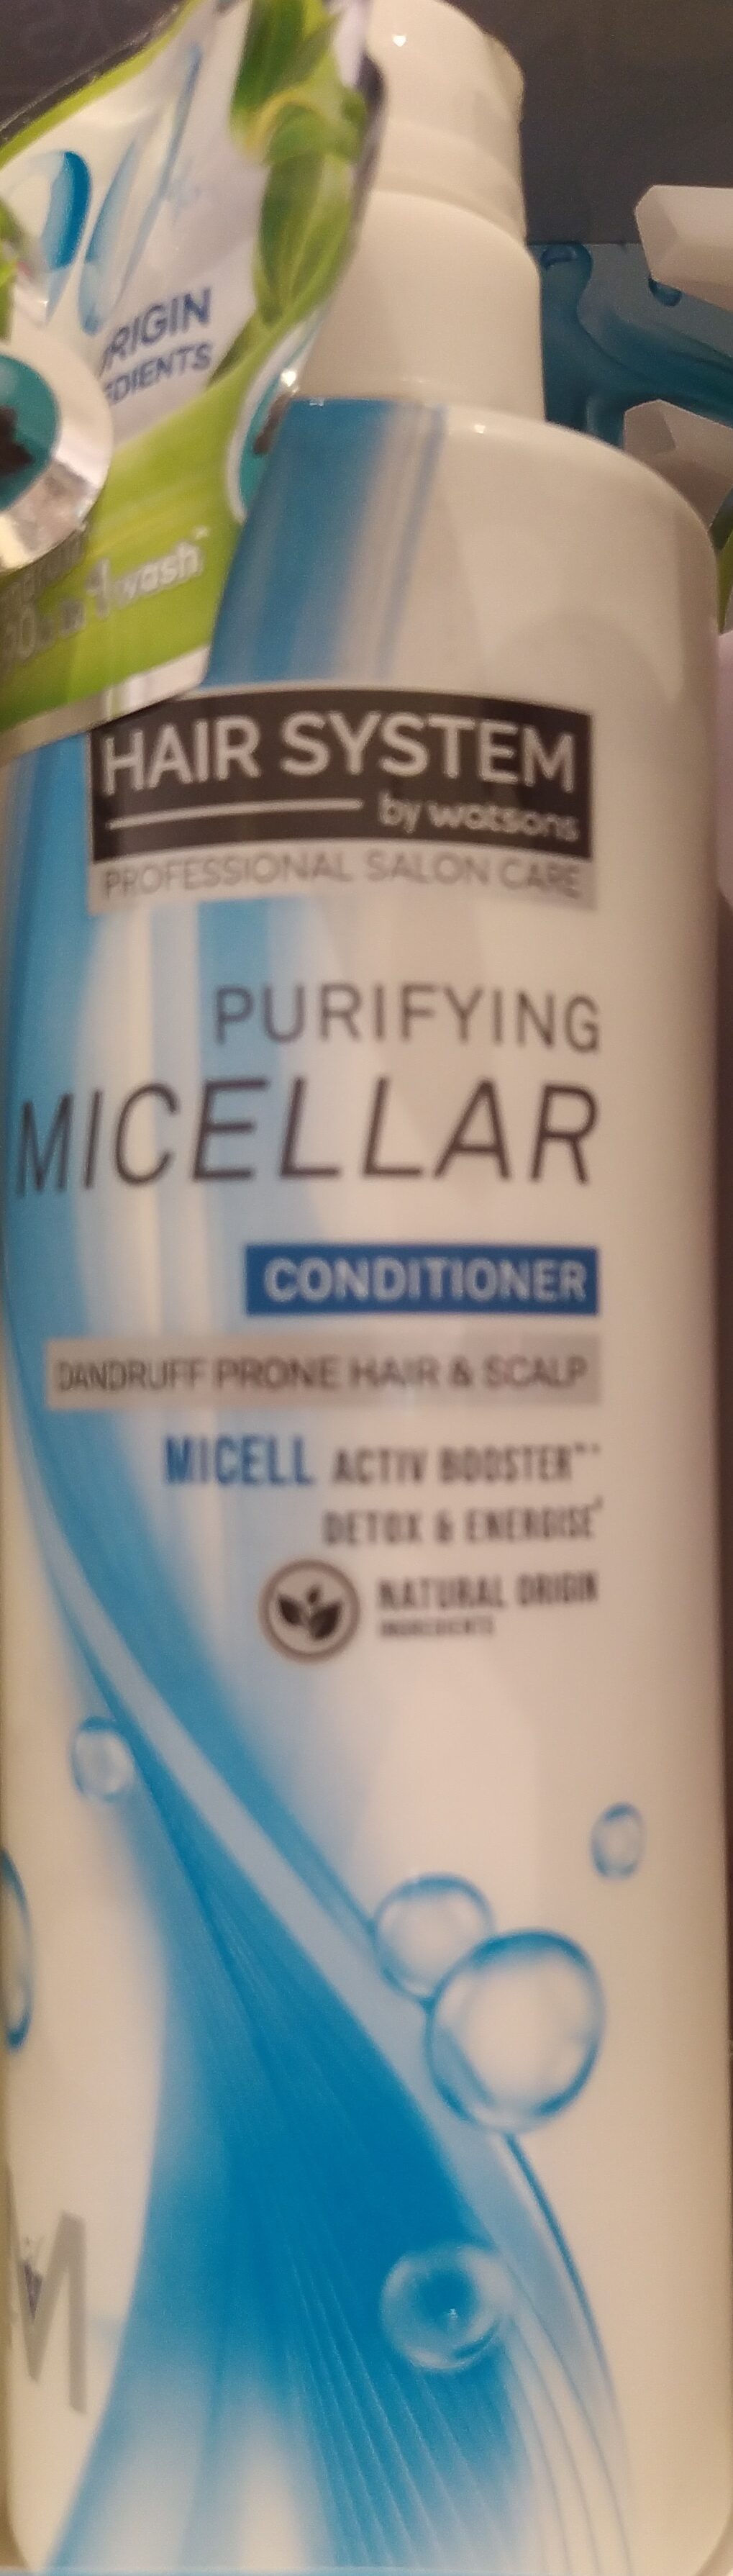 Micellar Botanical Purifying Conditioner - Product - en